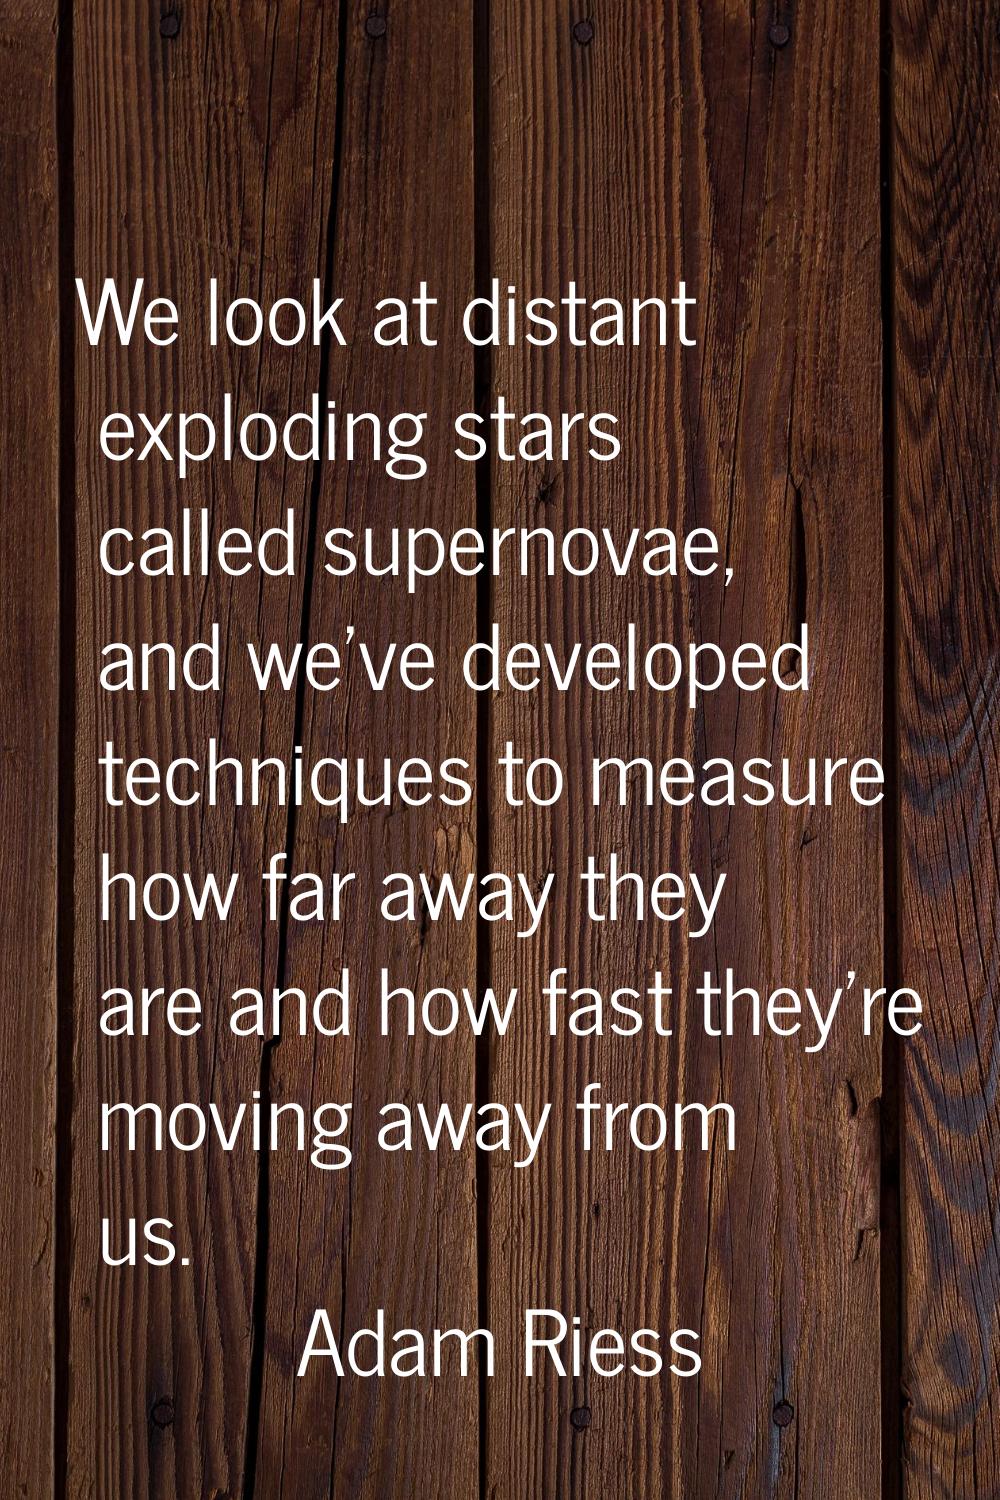 We look at distant exploding stars called supernovae, and we've developed techniques to measure how